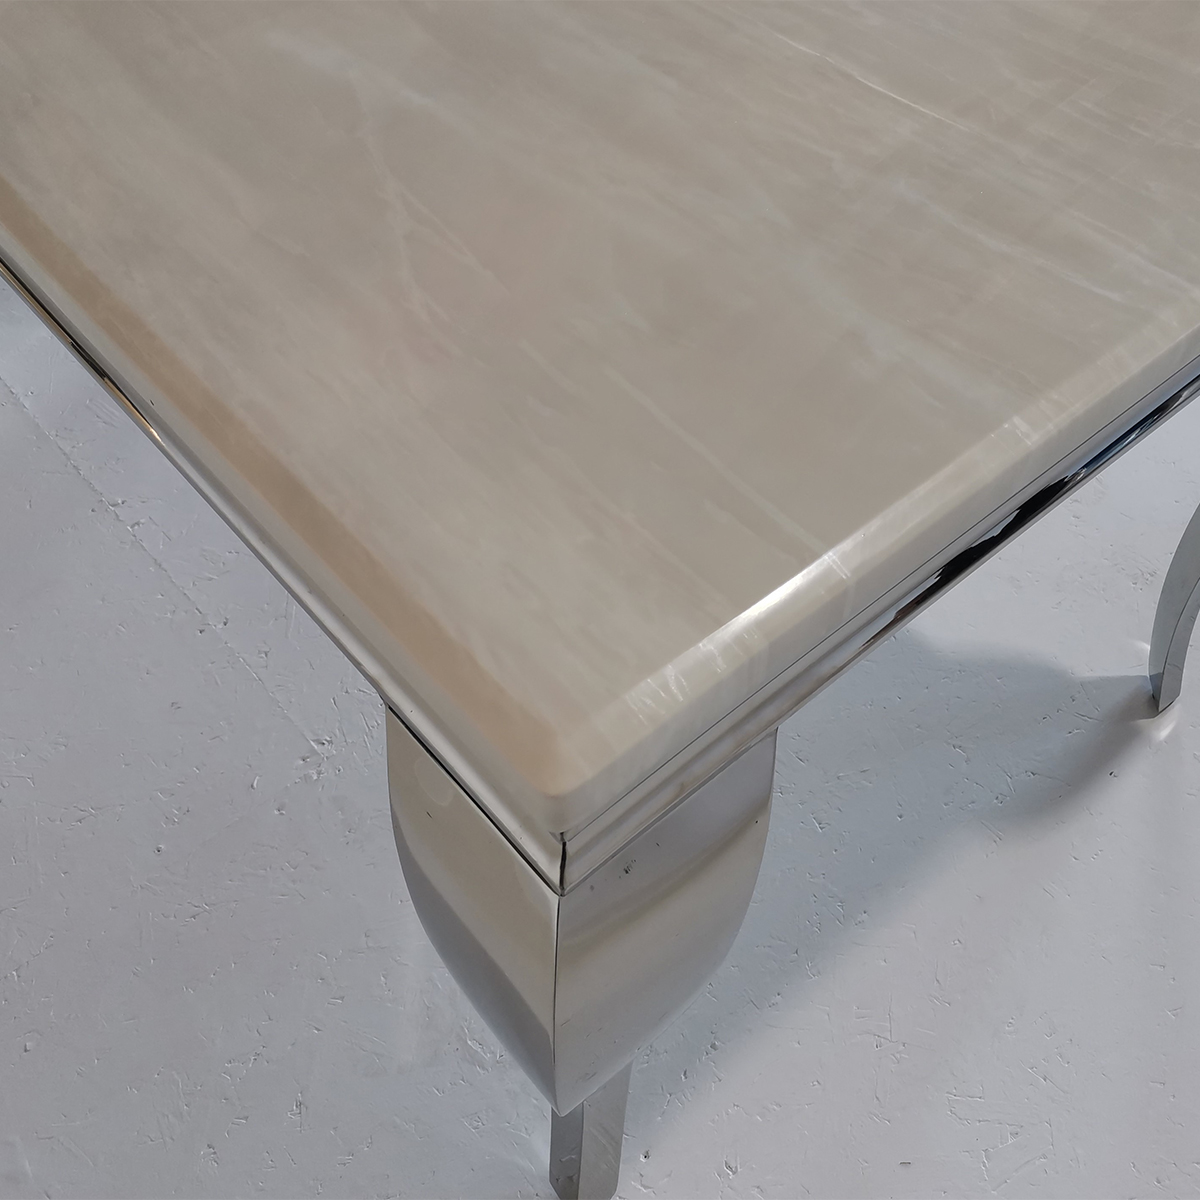 Liyana Cream 1.4m Marble Dining Table